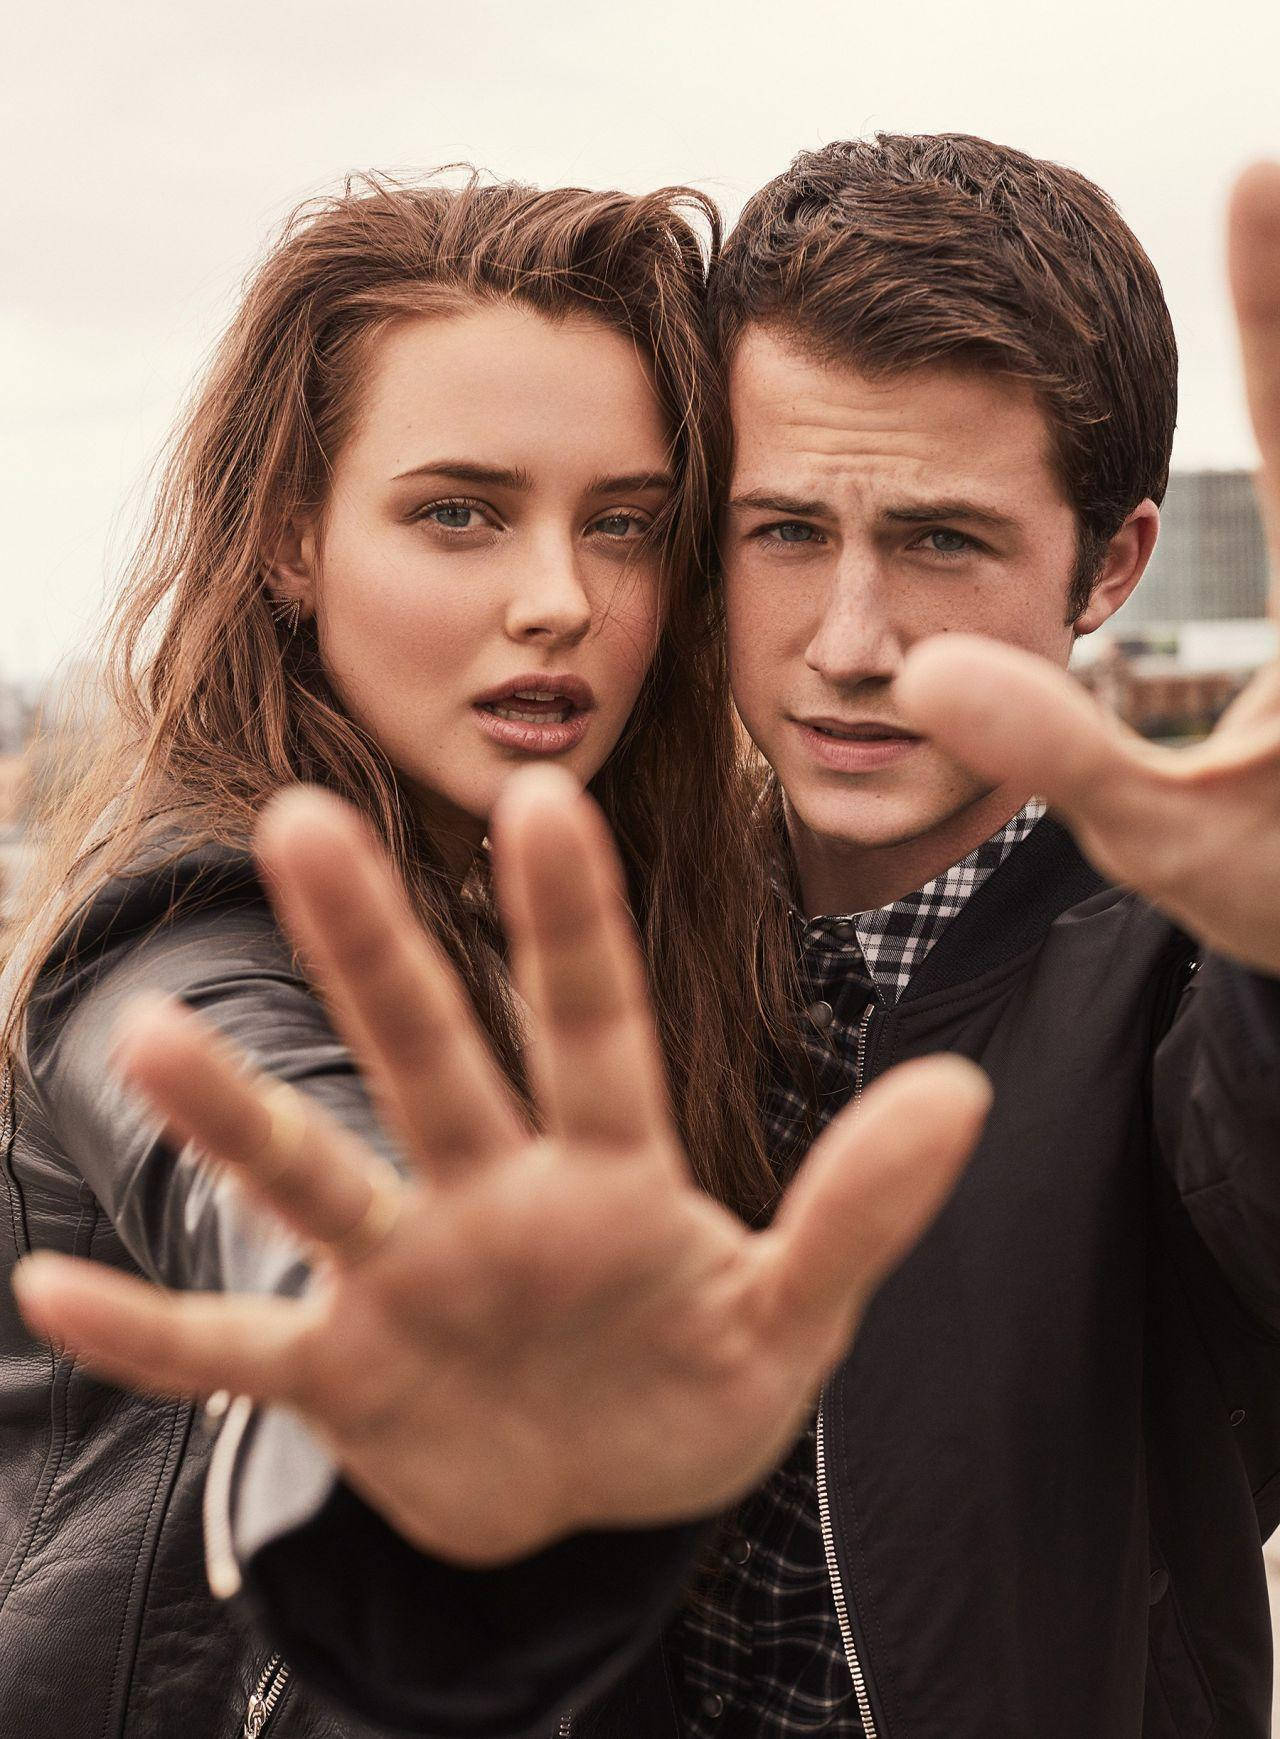 Katherine Langford And Dylan Minnette